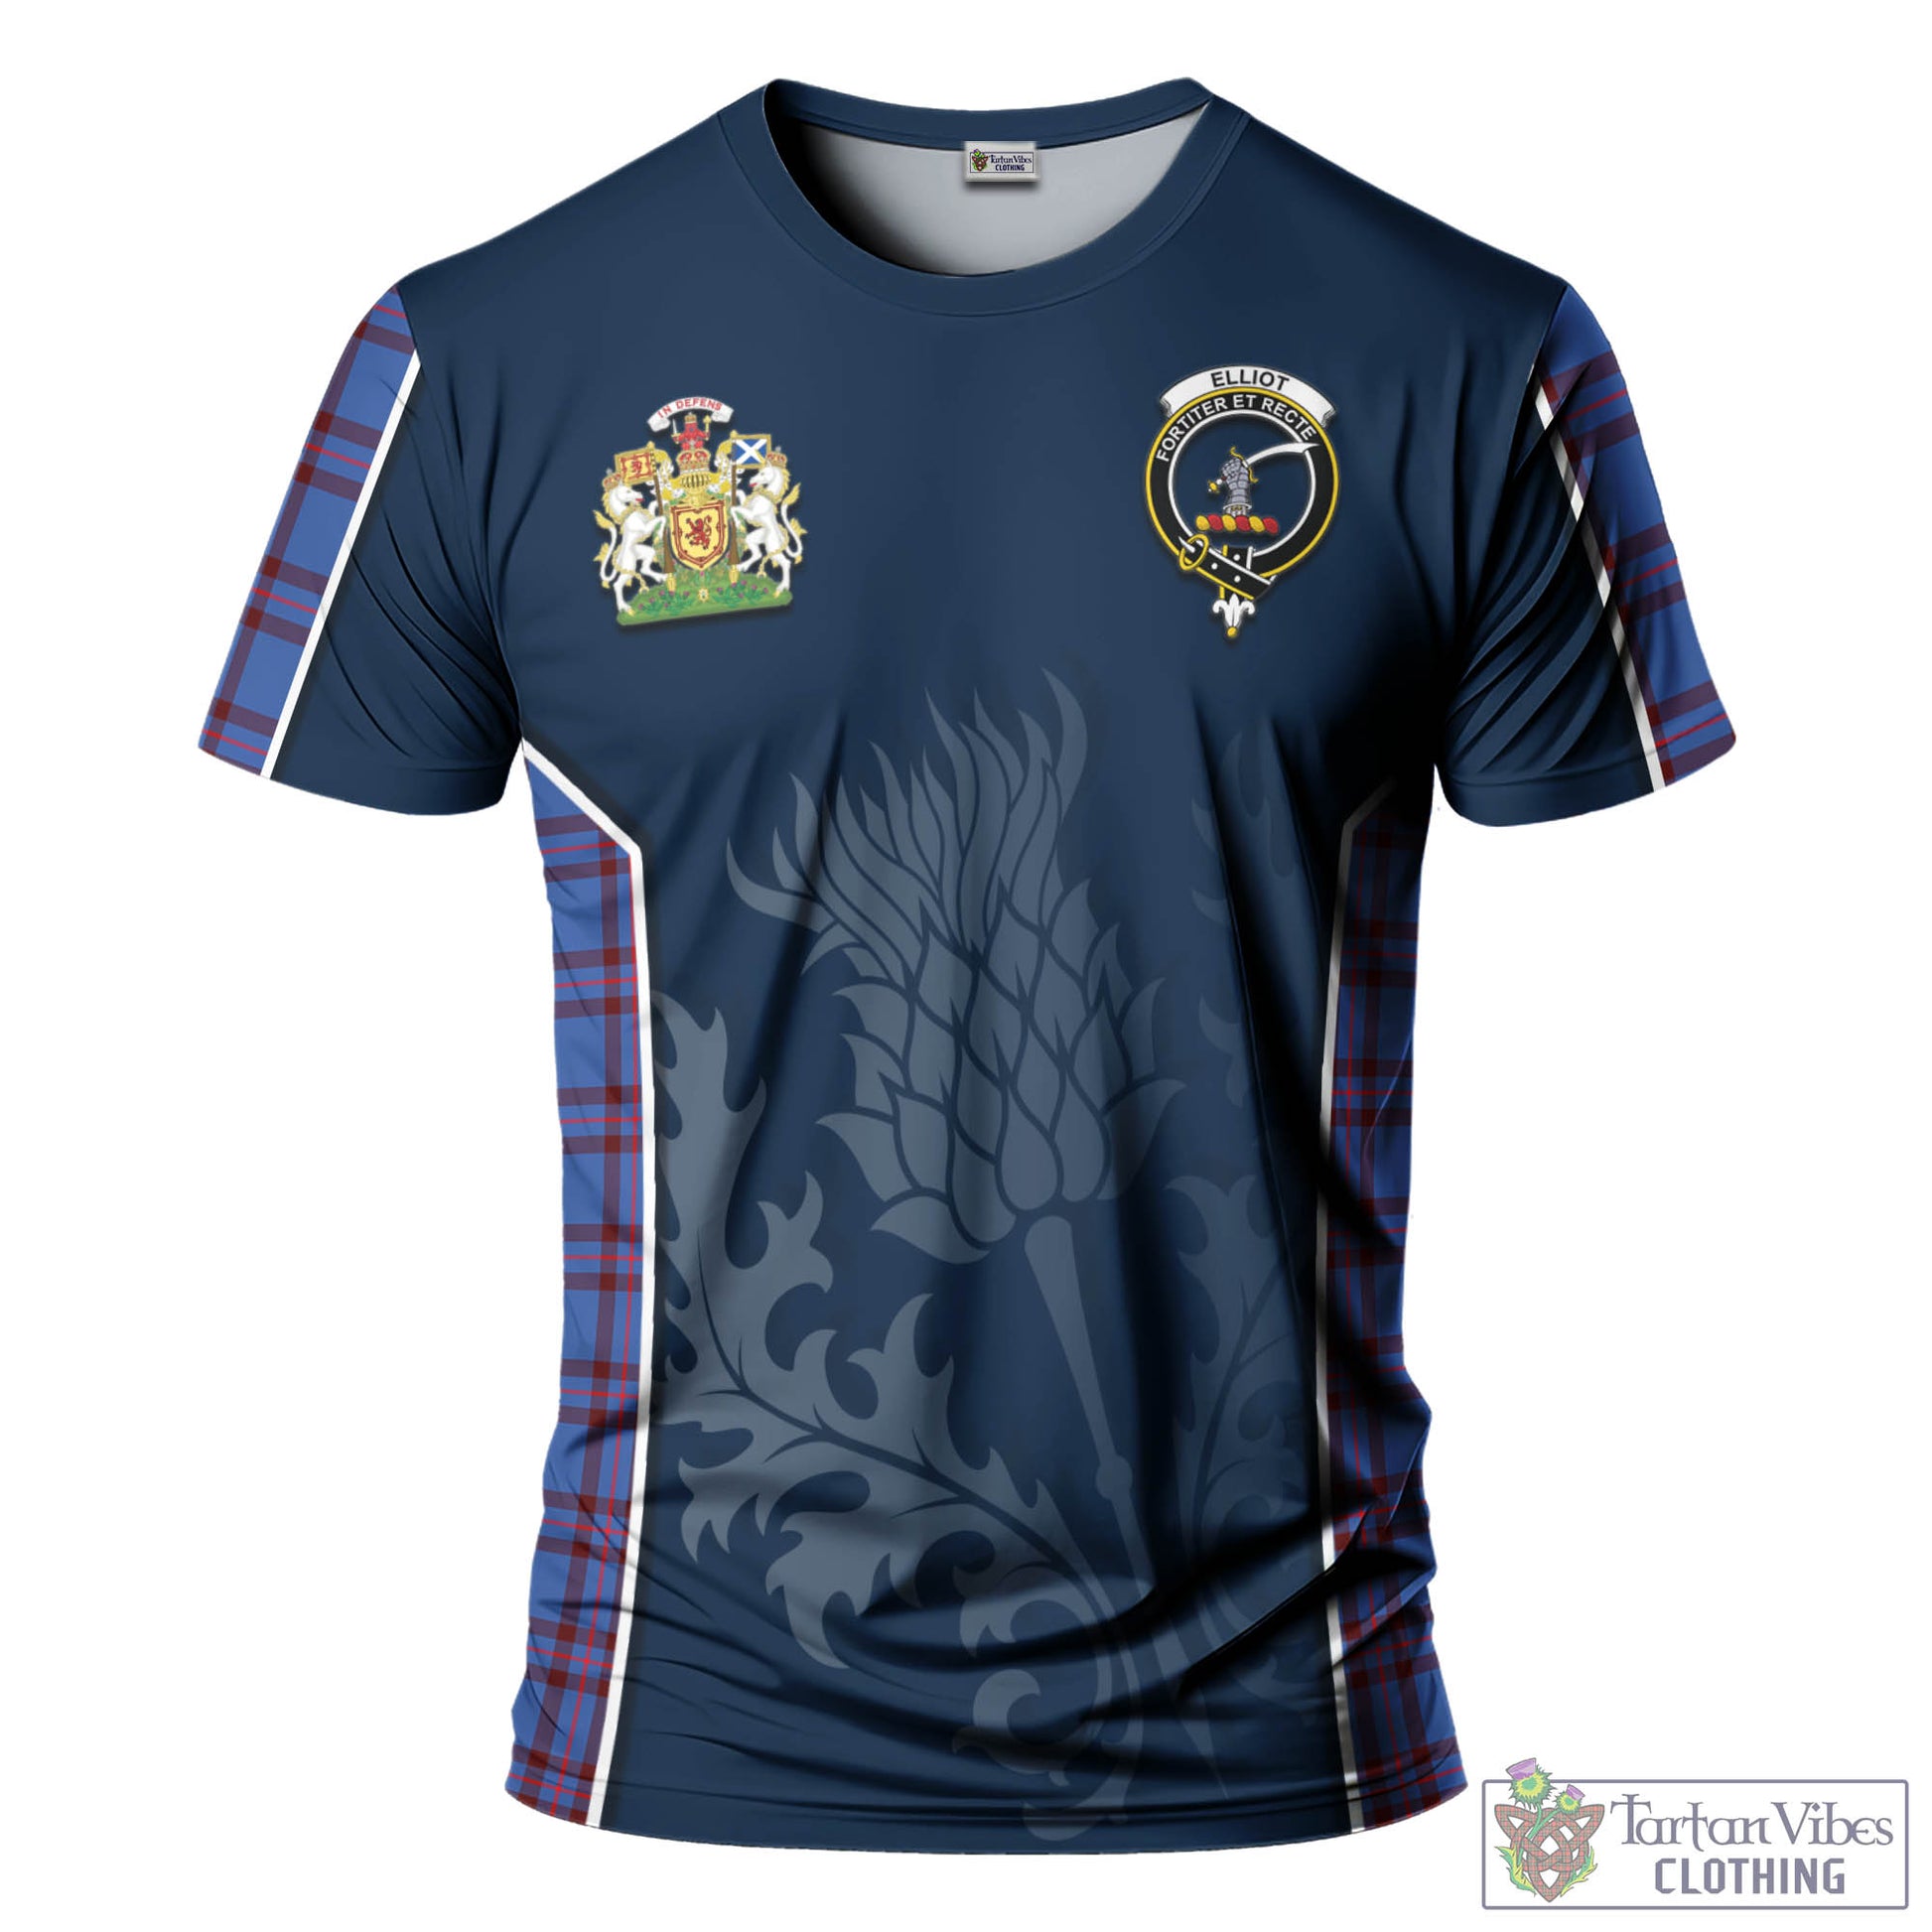 Tartan Vibes Clothing Elliot Modern Tartan T-Shirt with Family Crest and Scottish Thistle Vibes Sport Style